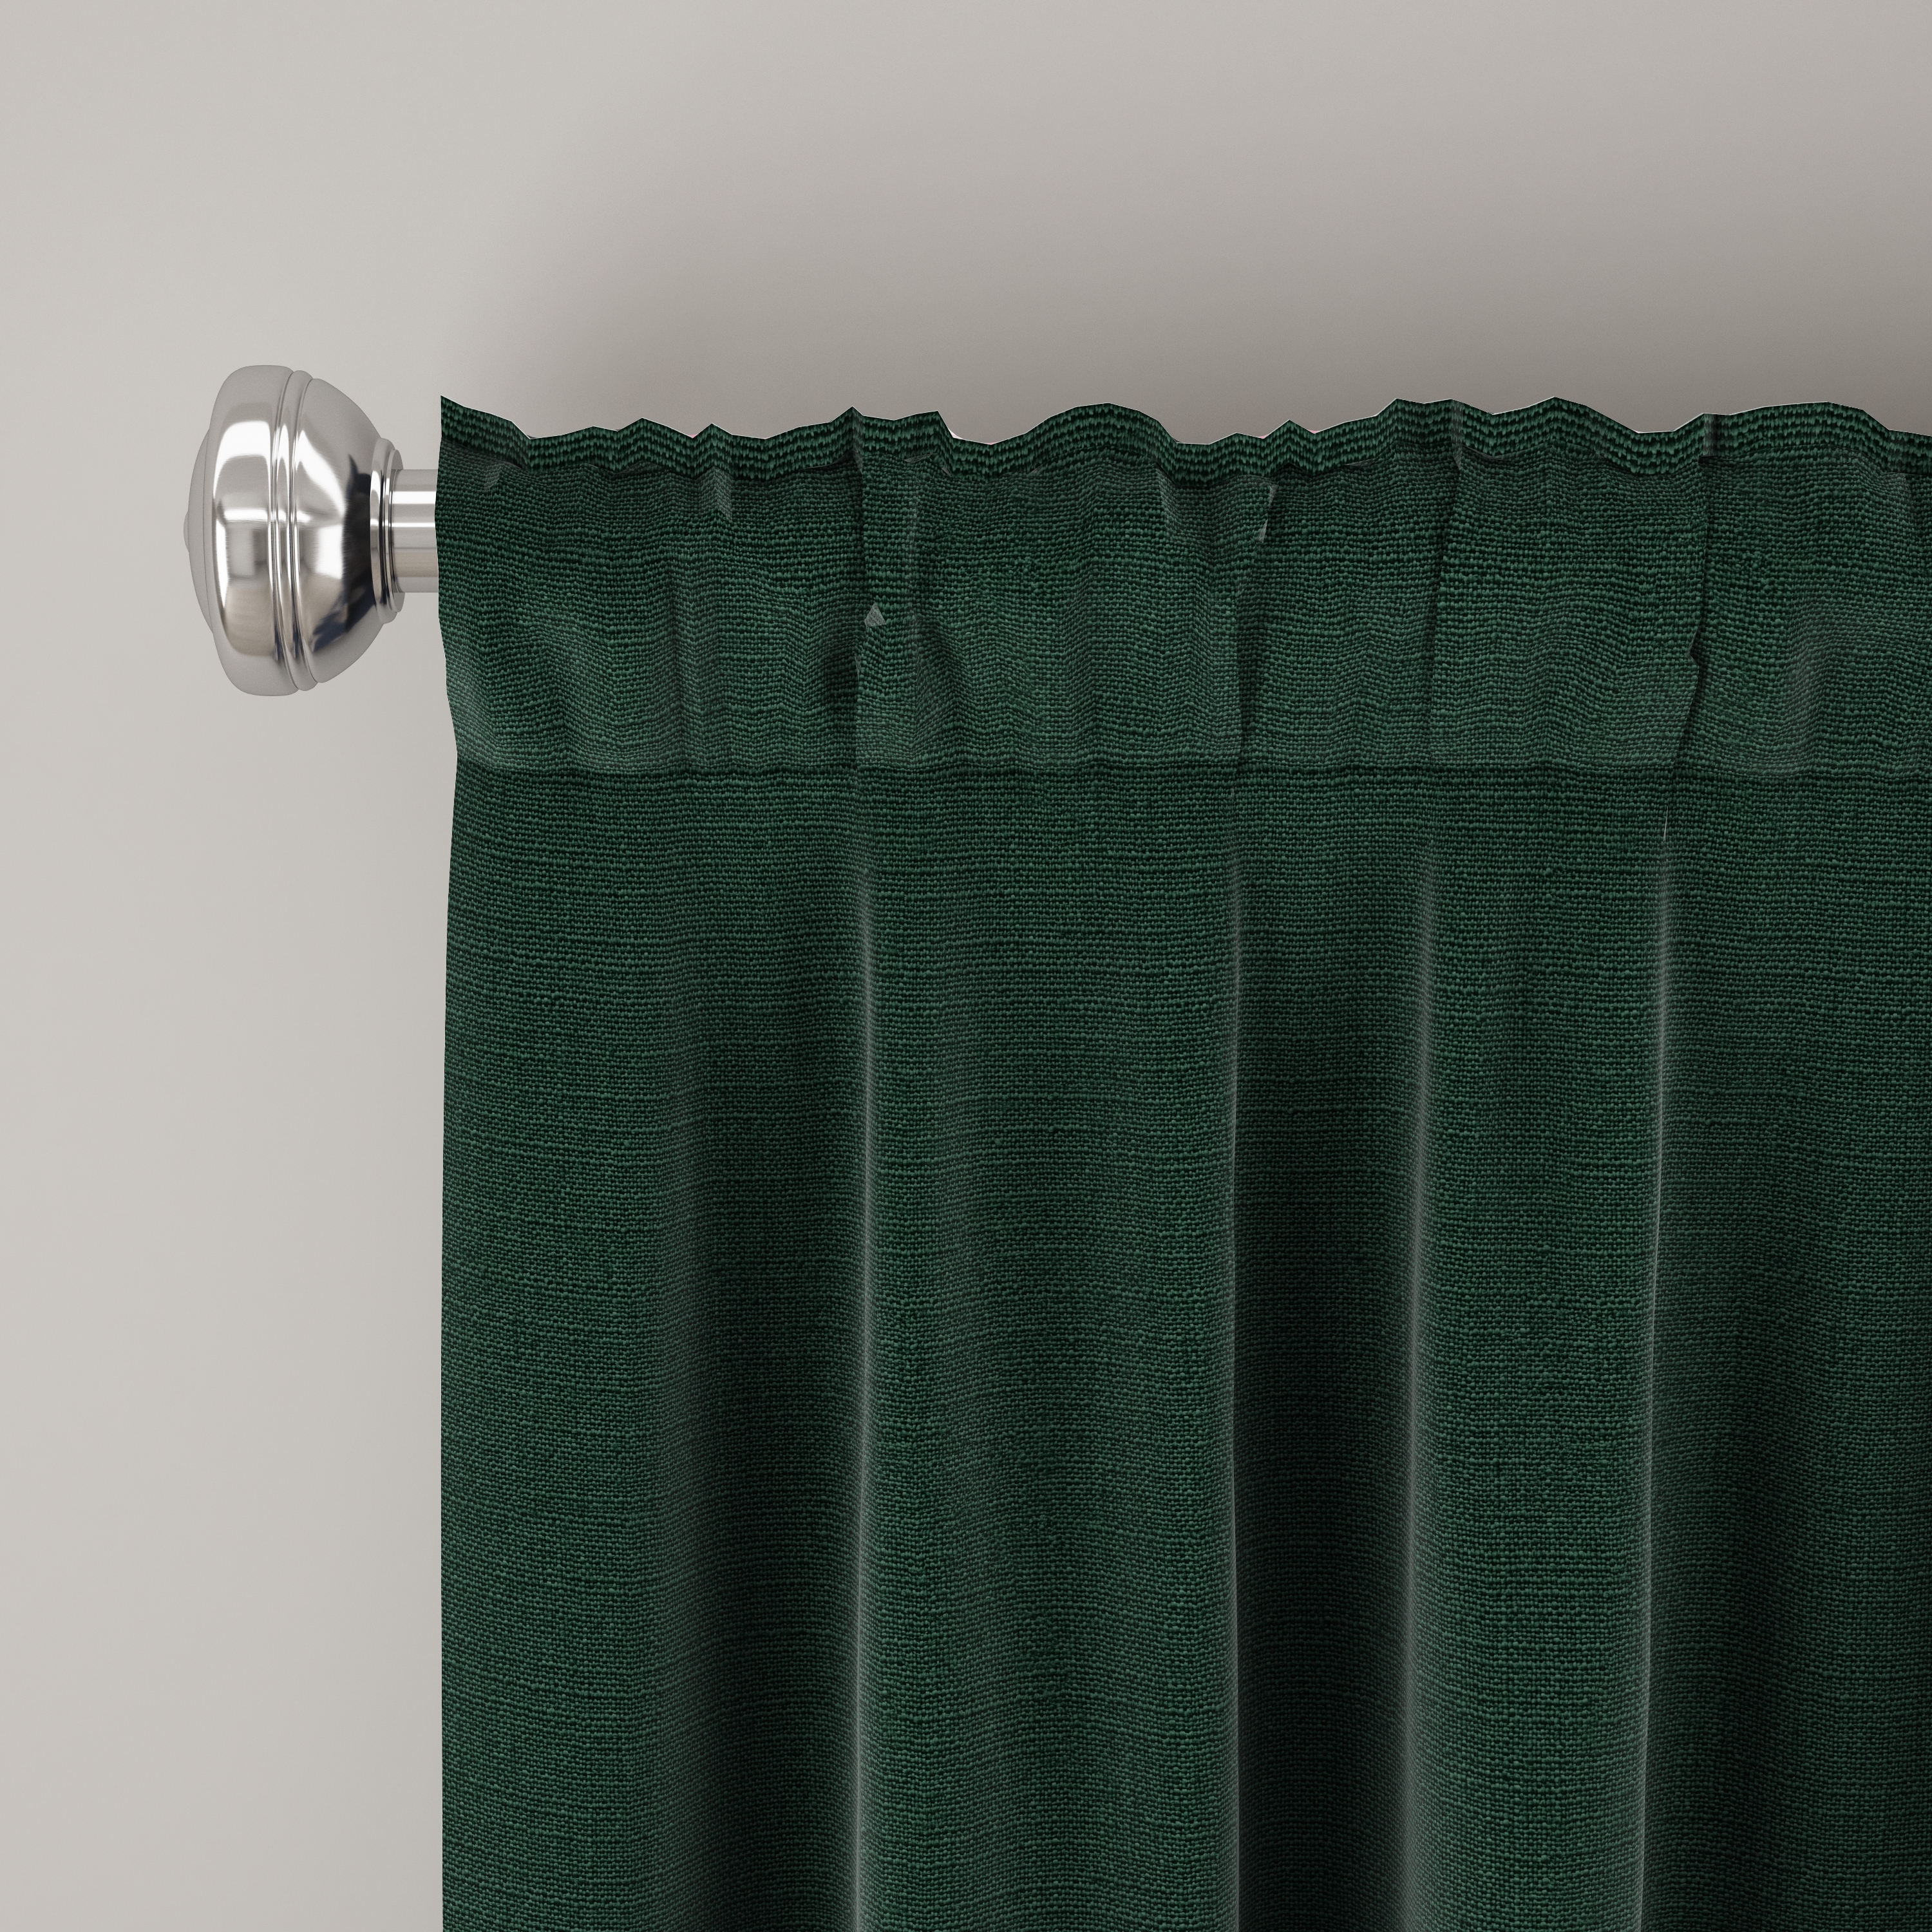 Conifer Green Curtain Panel, 96" x 50" Unlined - Image 3